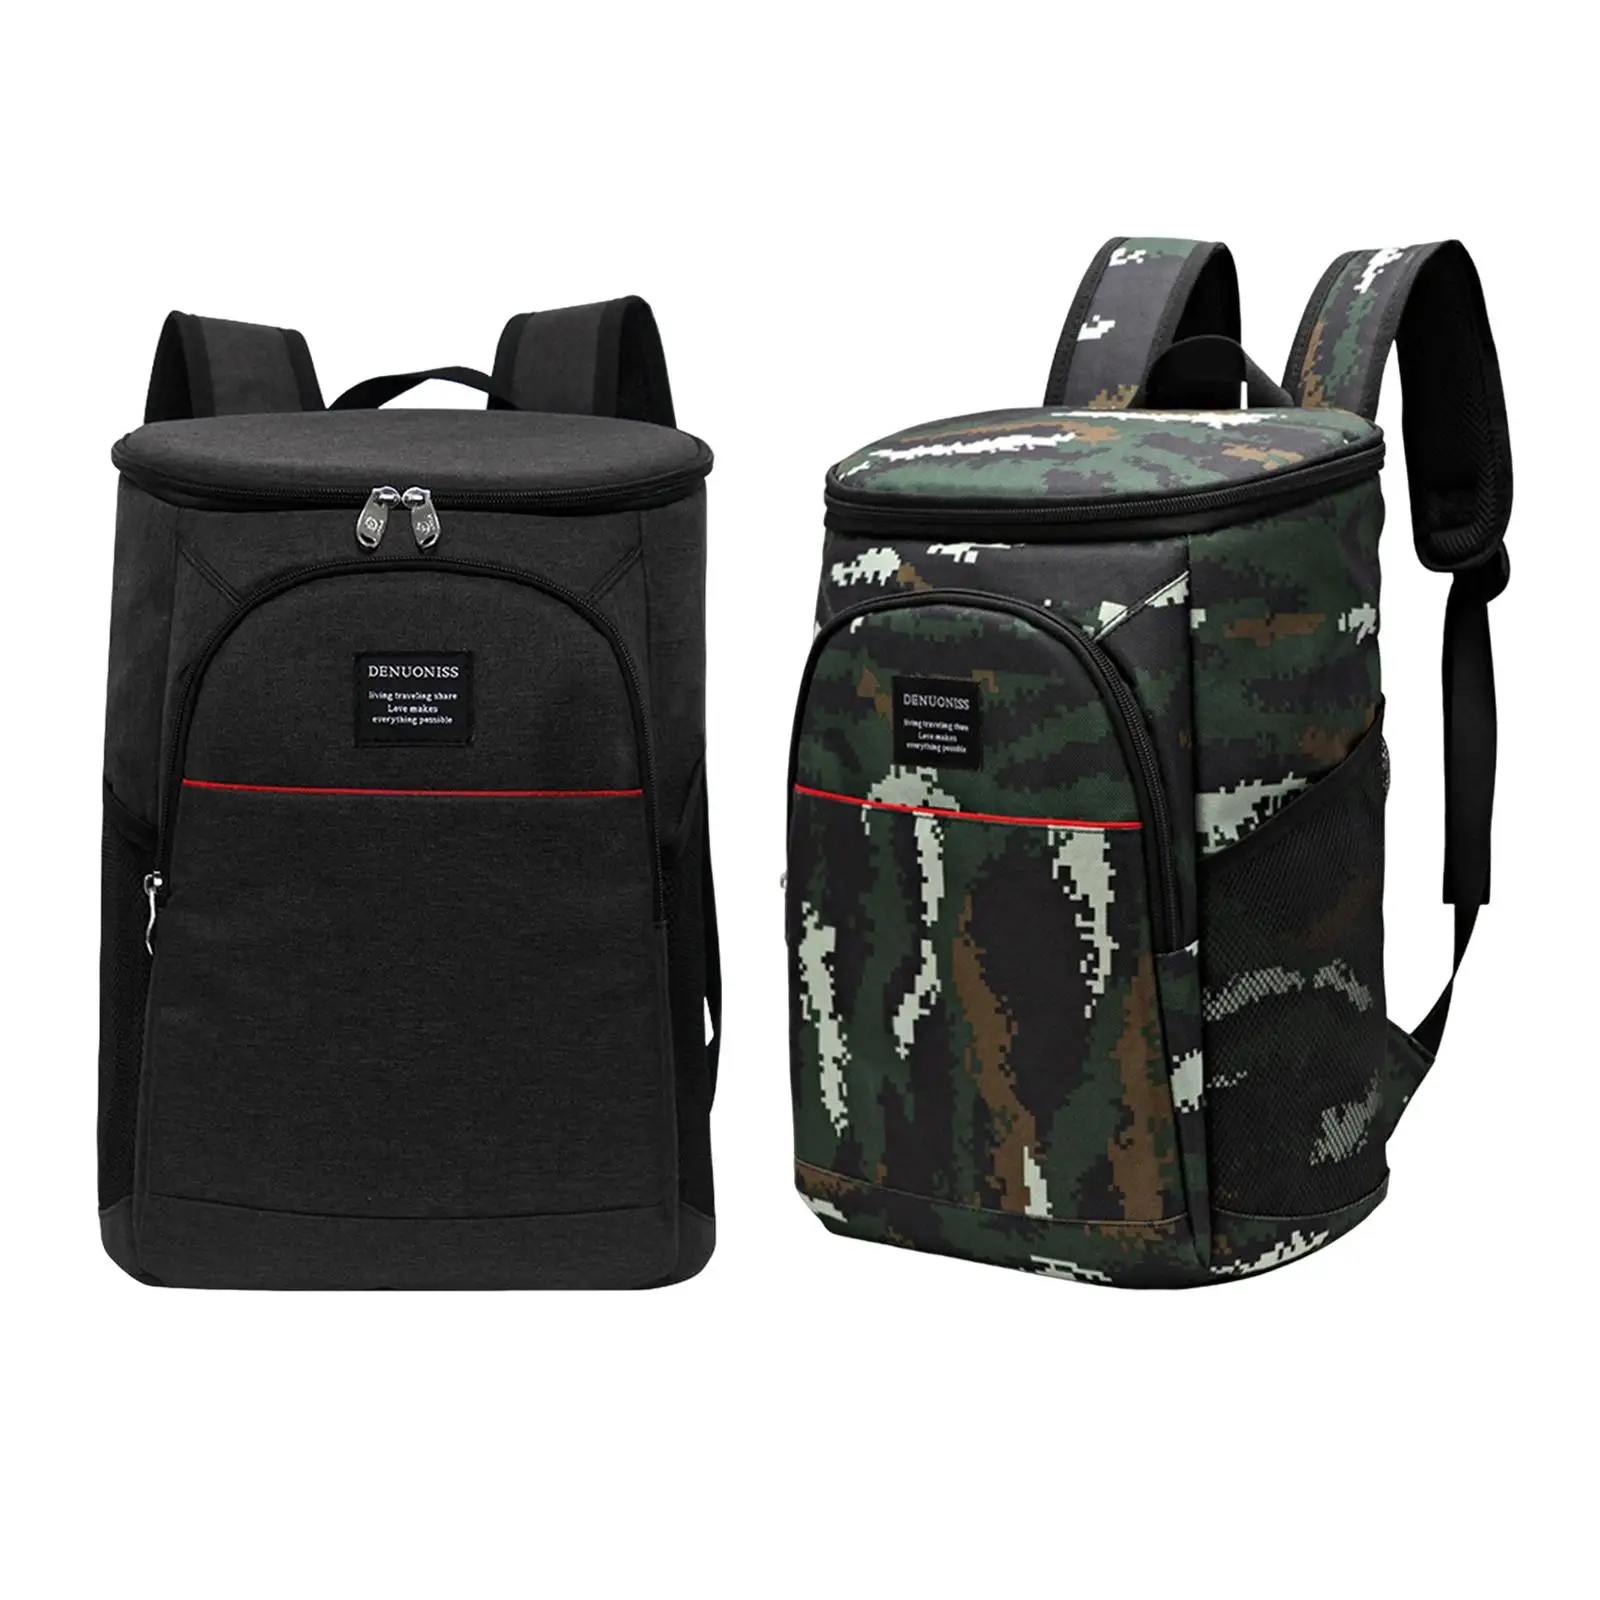 Backpack Cooler Thermal Bag for Cold and Hot Food for Travel Hiking Beach